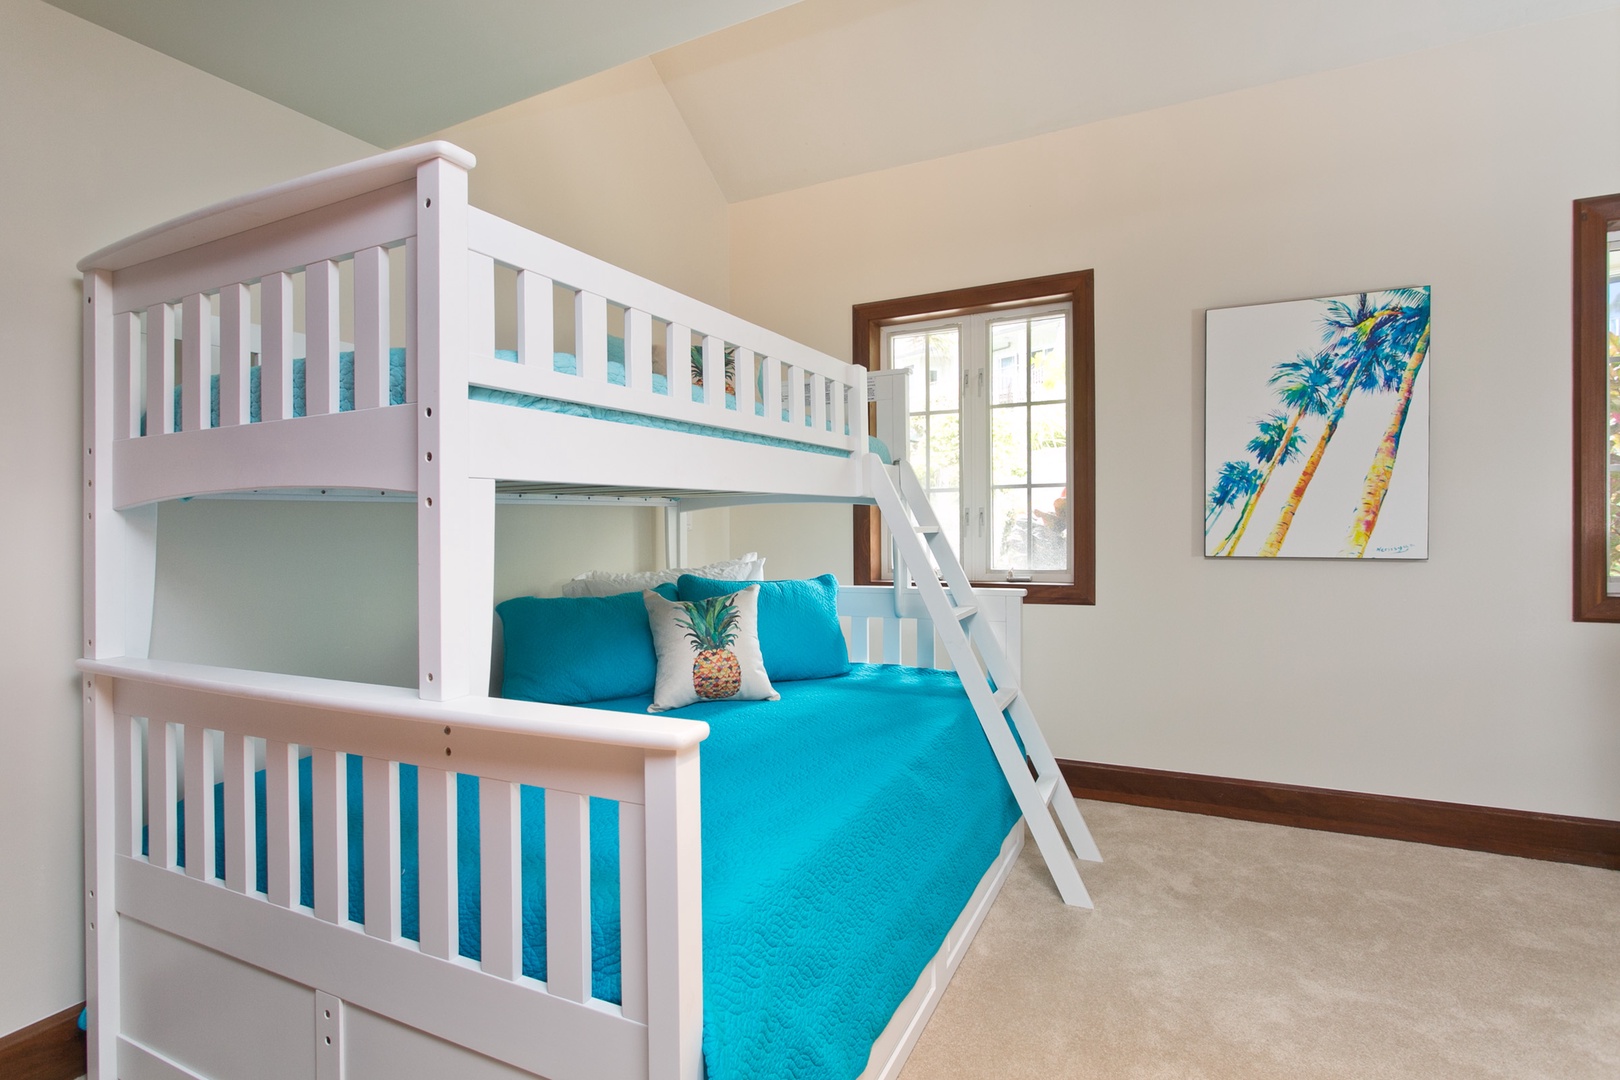 Kailua Vacation Rentals, Lanikai Village* - Hale Melia: Twin over double trundle bunk bed for the little ones.